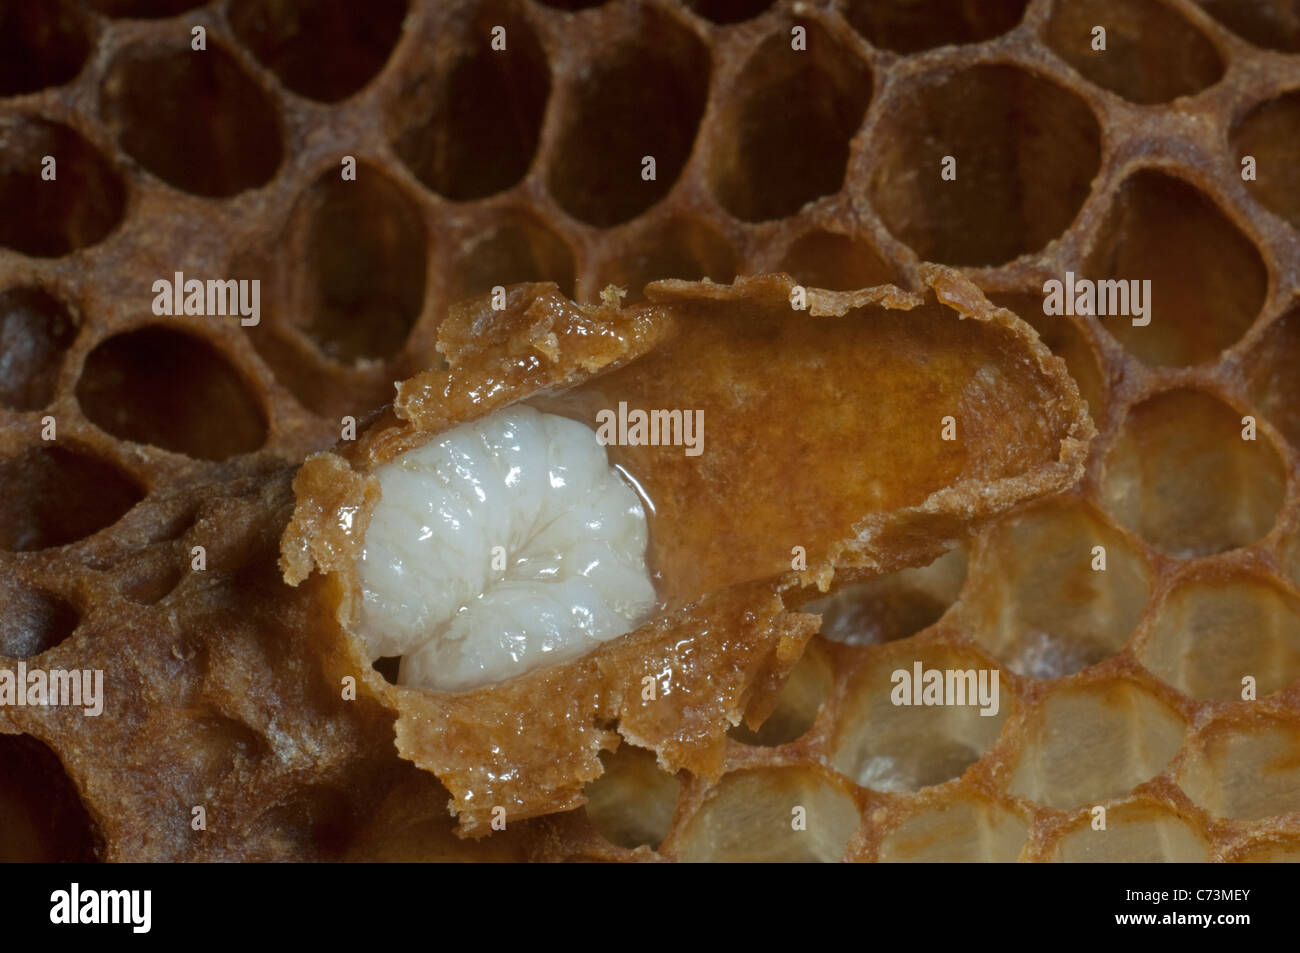 Honey Bee (Apis mellifera, Apis mellifica). Close-up of honeycomb with an opened queen cell, showing queen larva and royal jelly Stock Photo